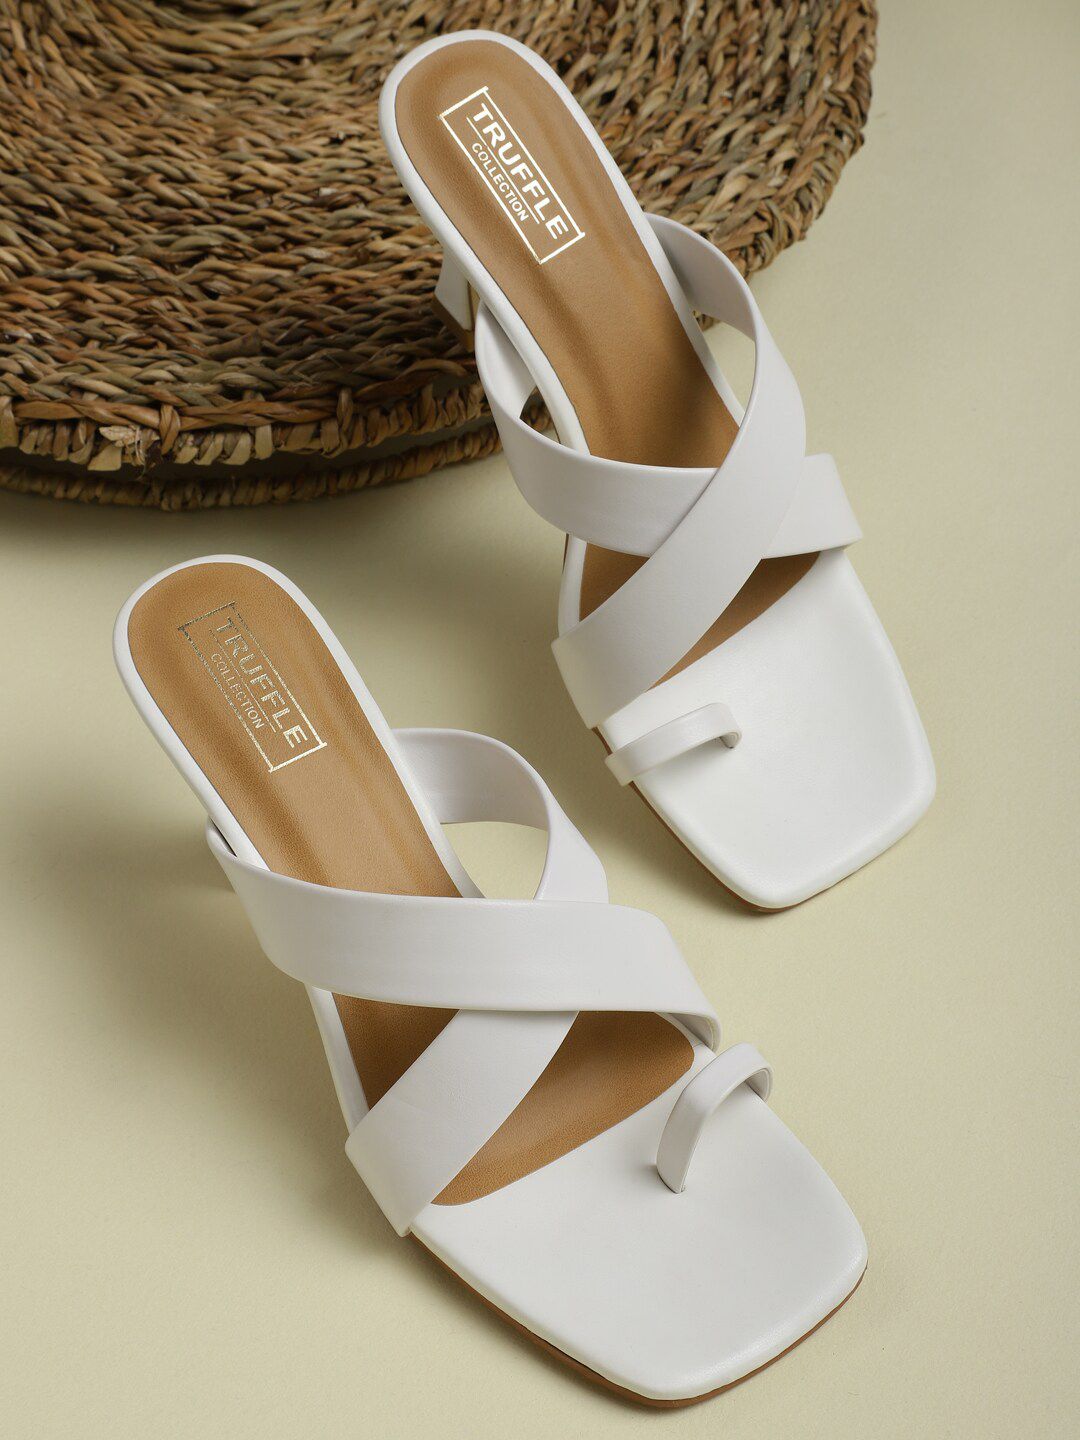 Truffle Collection White PU Wedge Sandals with Buckles Price in India